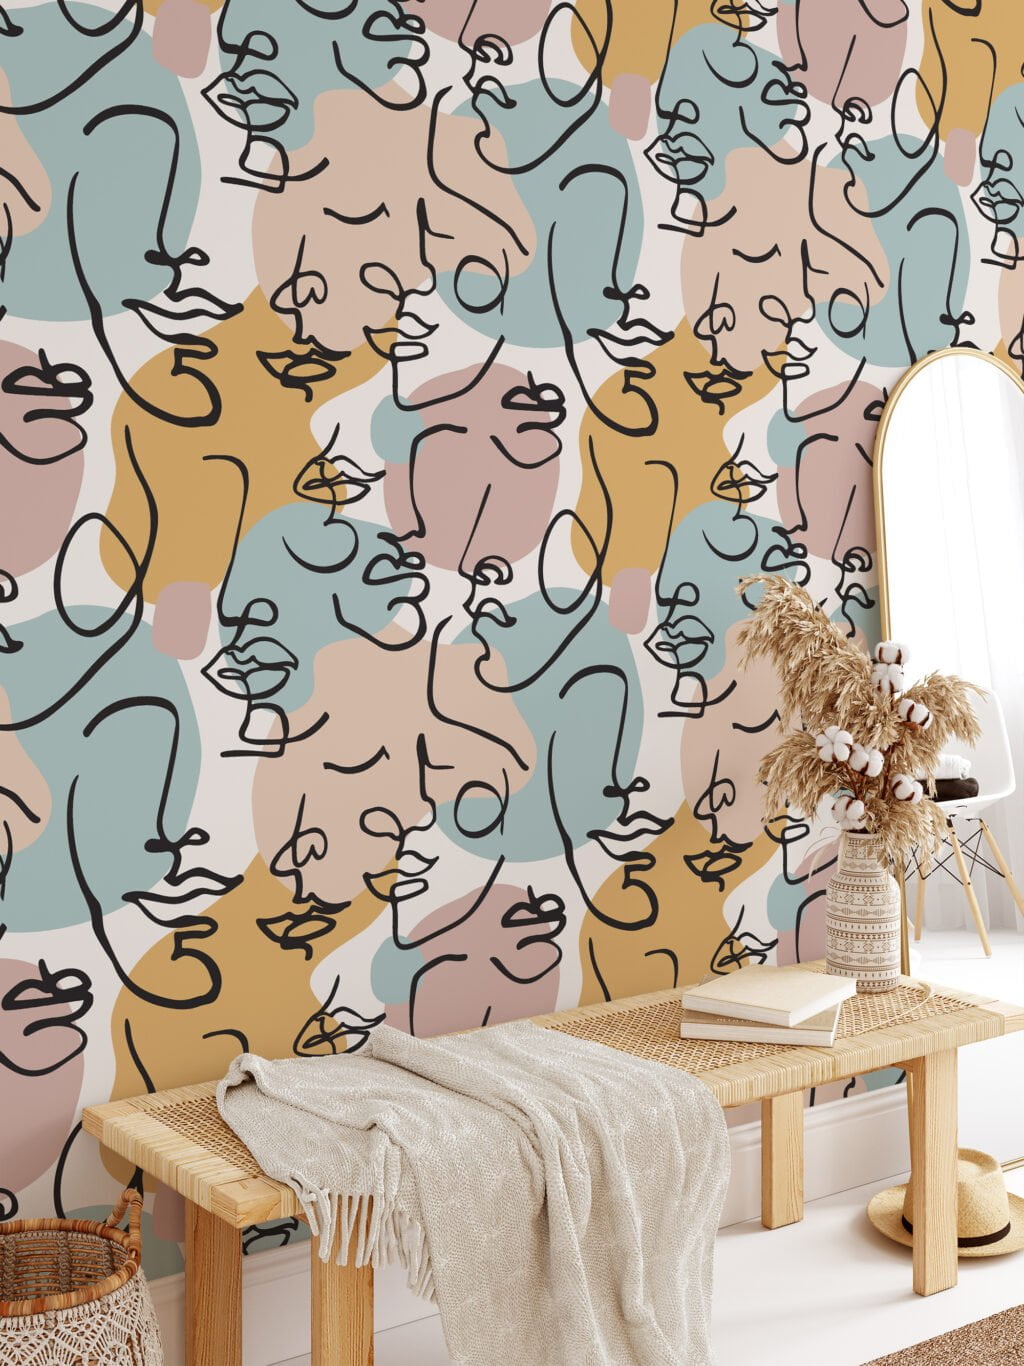 Abstract Human Face Design Pattern Wallpaper, Modern Faces Collage Peel & Stick Wall Mural